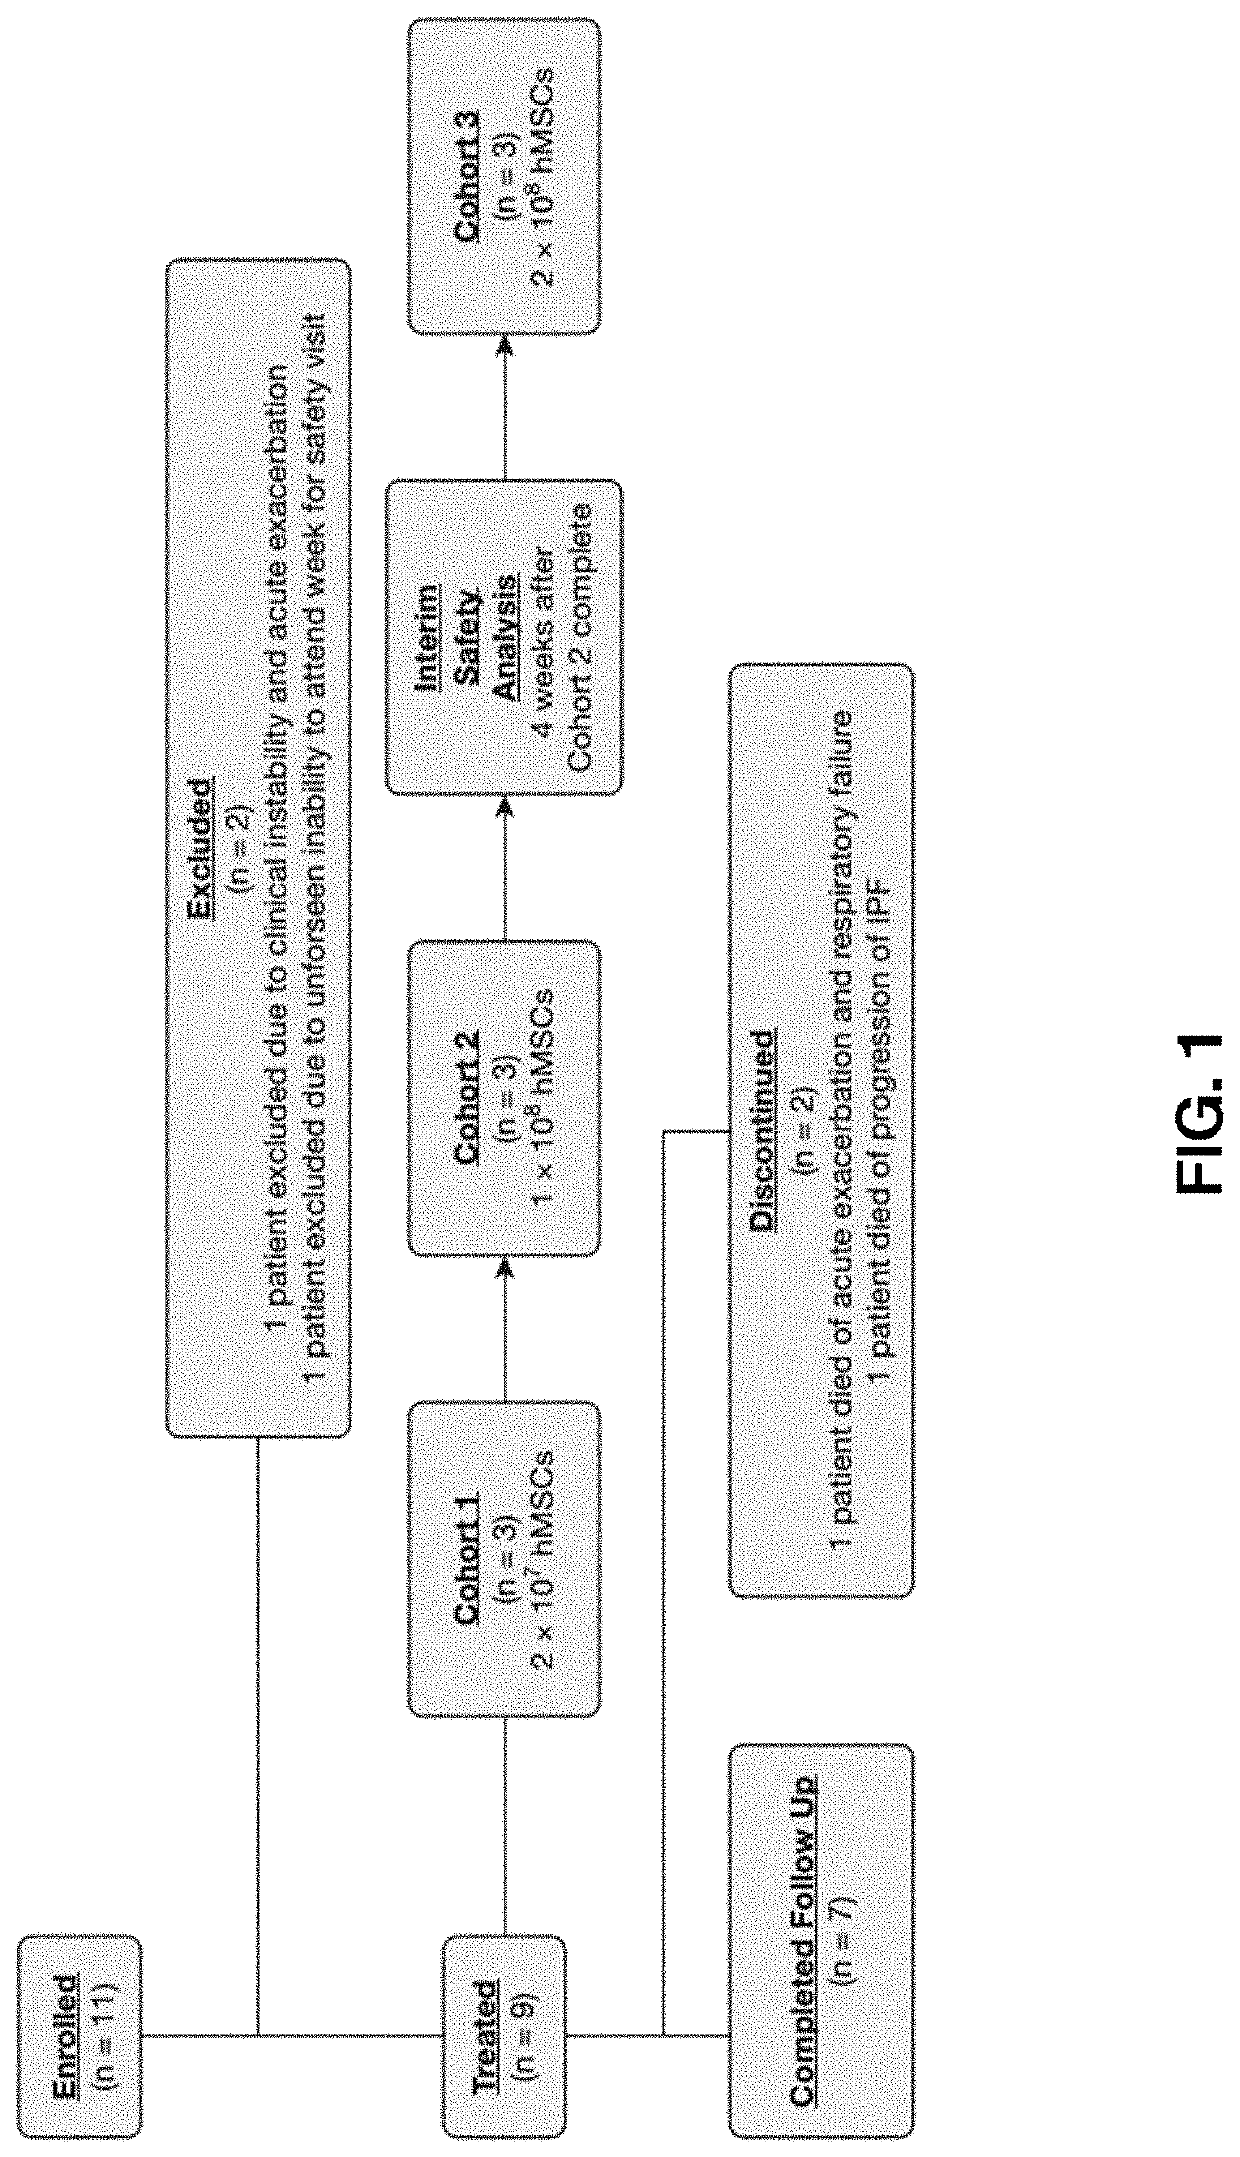 Methods for attenuating viral infection and for treating lung injury